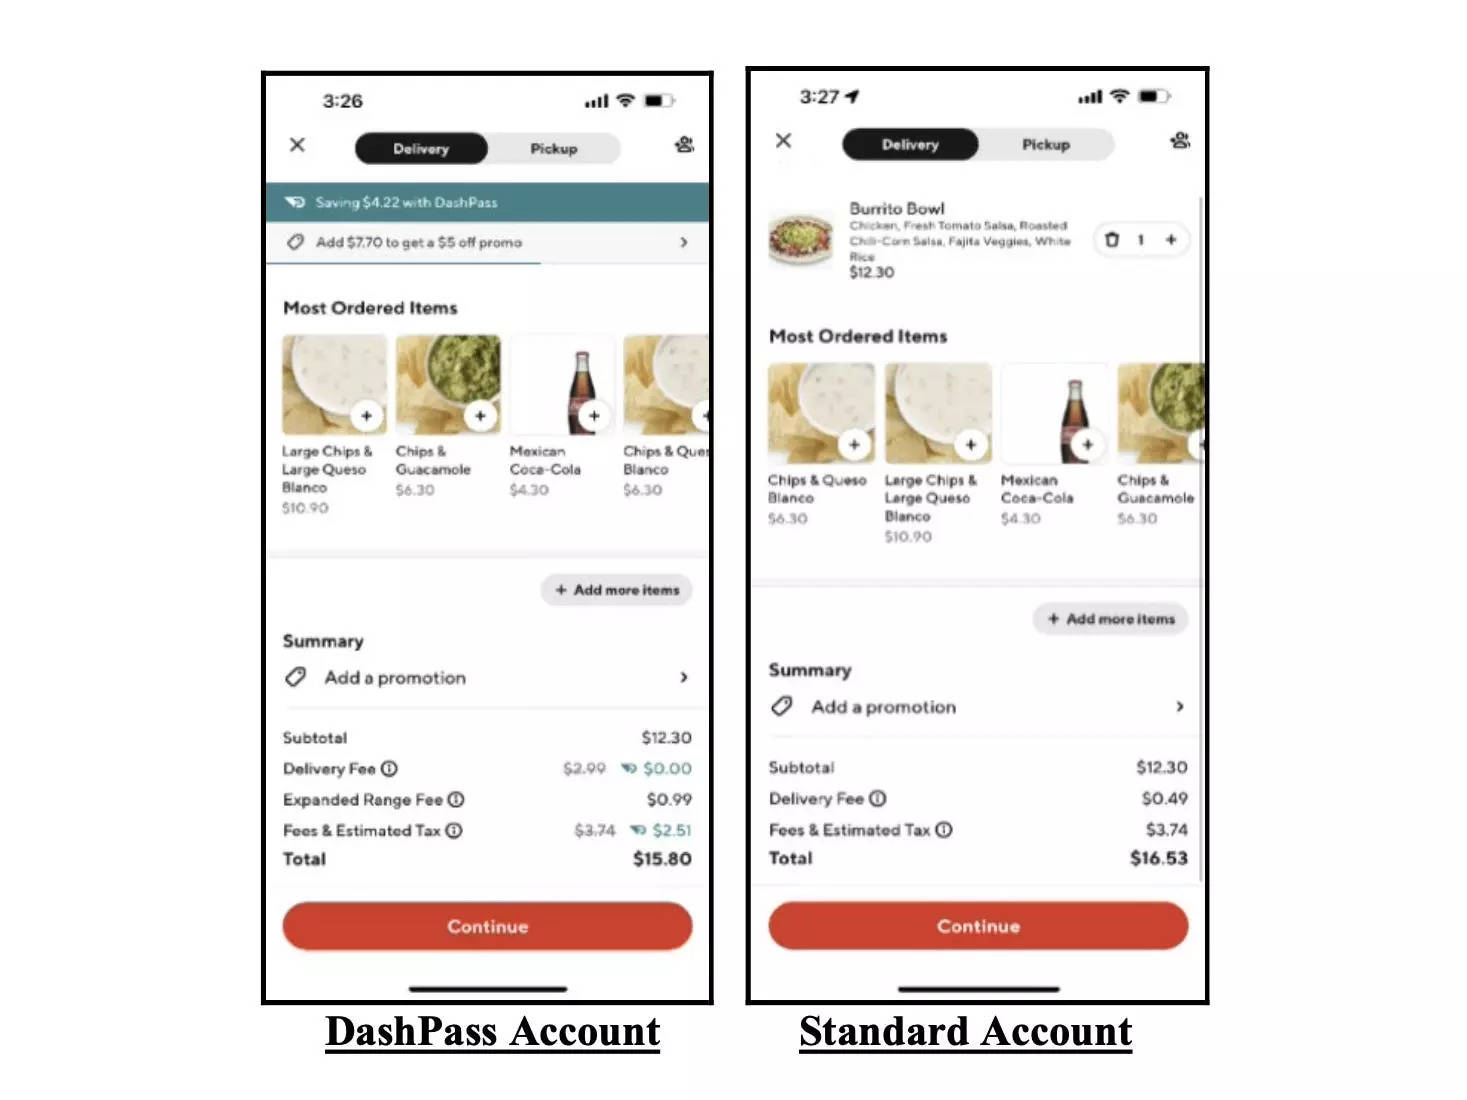 Two screenshots of the DoorDash app from the proposed class action lawsuit show two orders for a burrito bowl at Chipotle, one using DashPass and the other not. The DashPass account is assessed a $0.99 expanded range fee and the regular account is not despite both using the same delivery address.